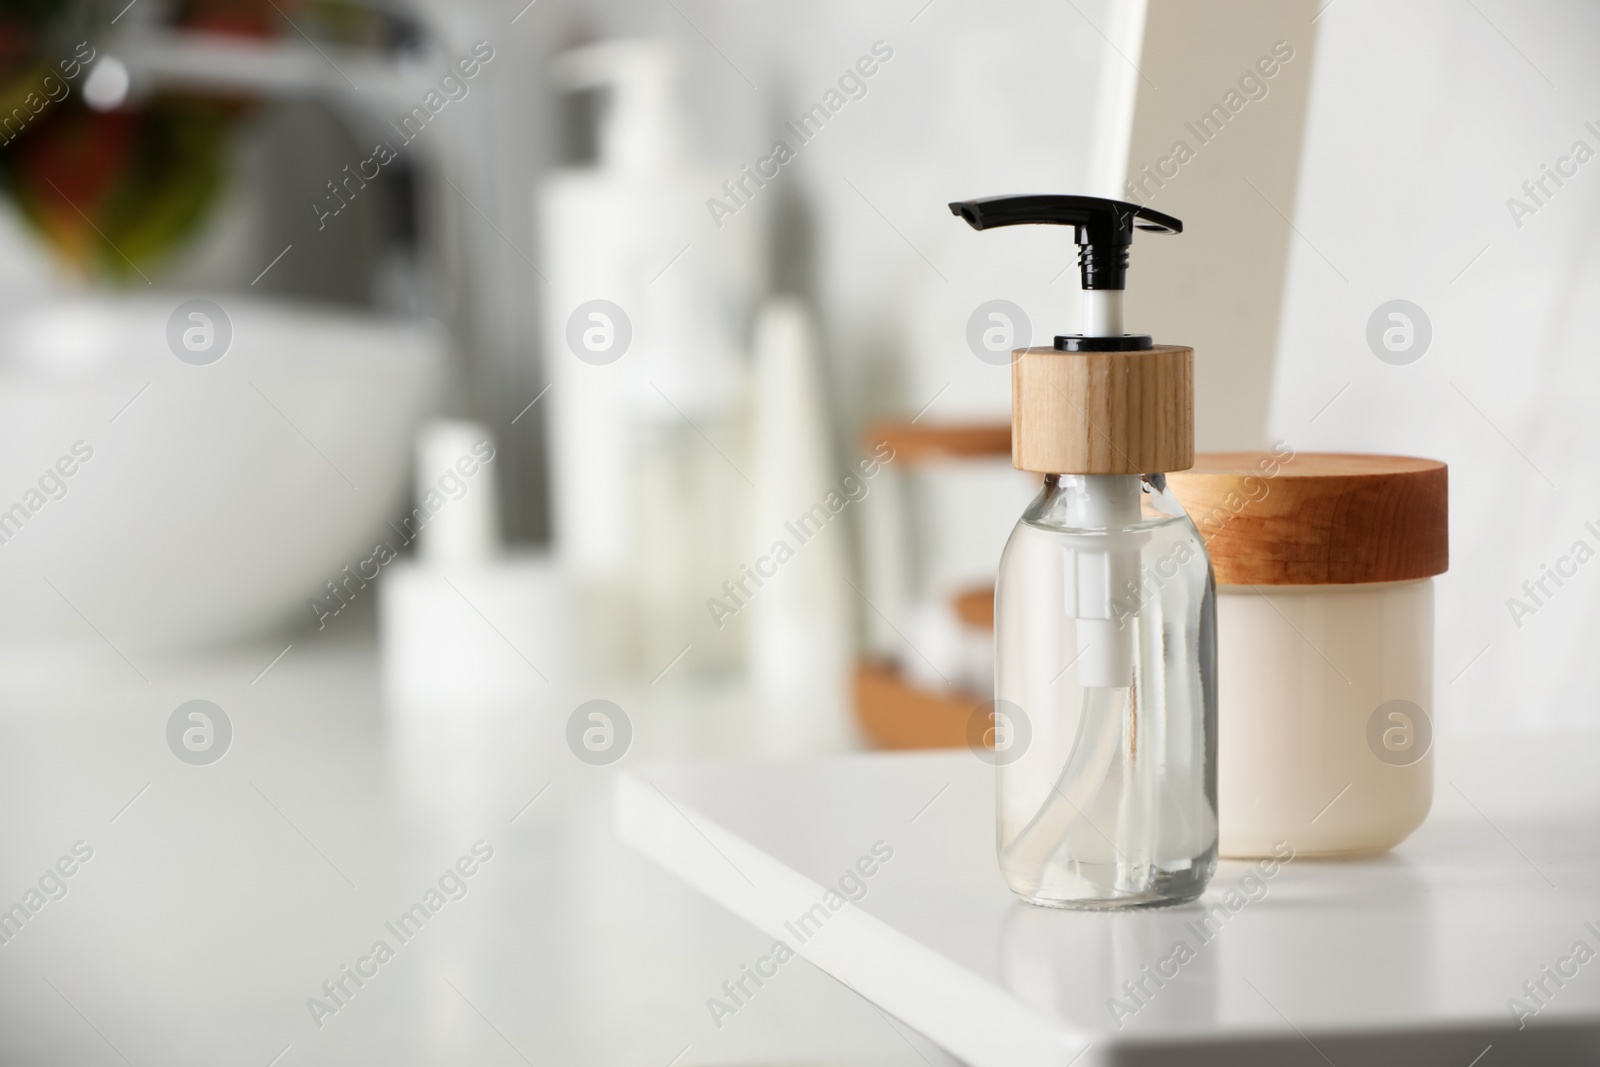 Photo of Different personal care products on shelf in bathroom. Space for text